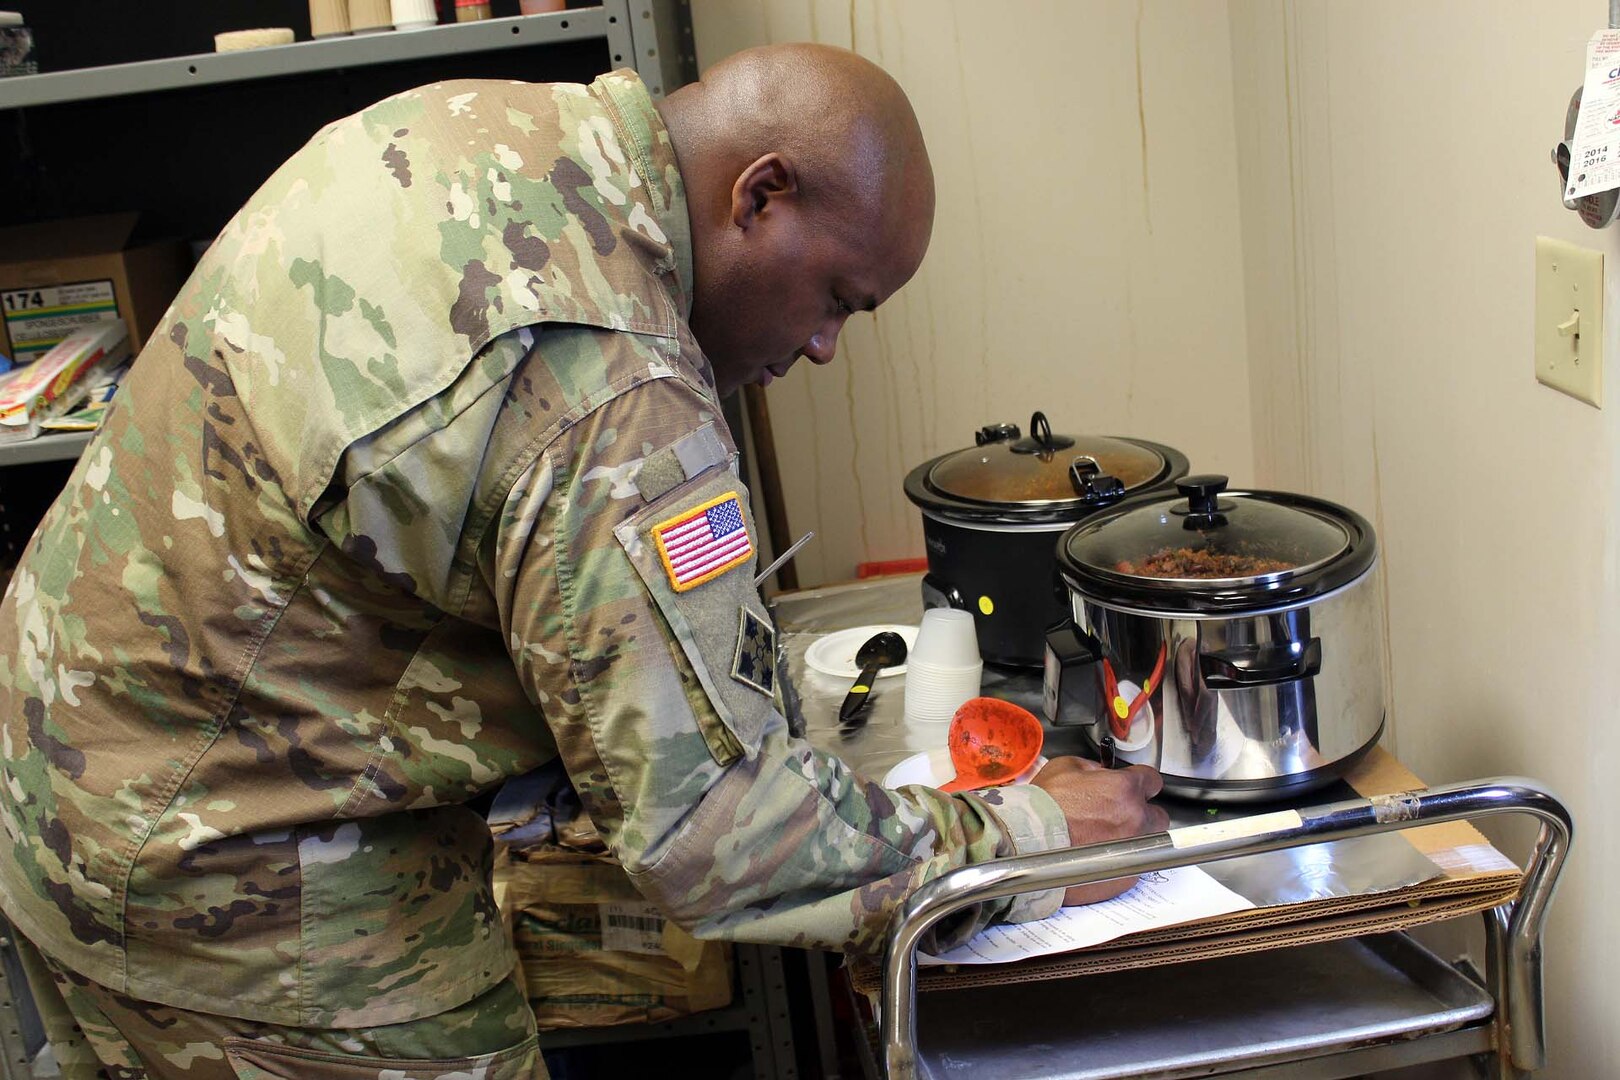 Army Maj. Lionel Macklin, program manager for combat feeding in the Subsistence supply chain at the Defense Logistics Agency Troop Support, judges samples during a workforce chili cook-off. The event, held at DLA Troop Support headquarters in Philadelphia, is an annual awareness event for the Combined Federal Campaign.